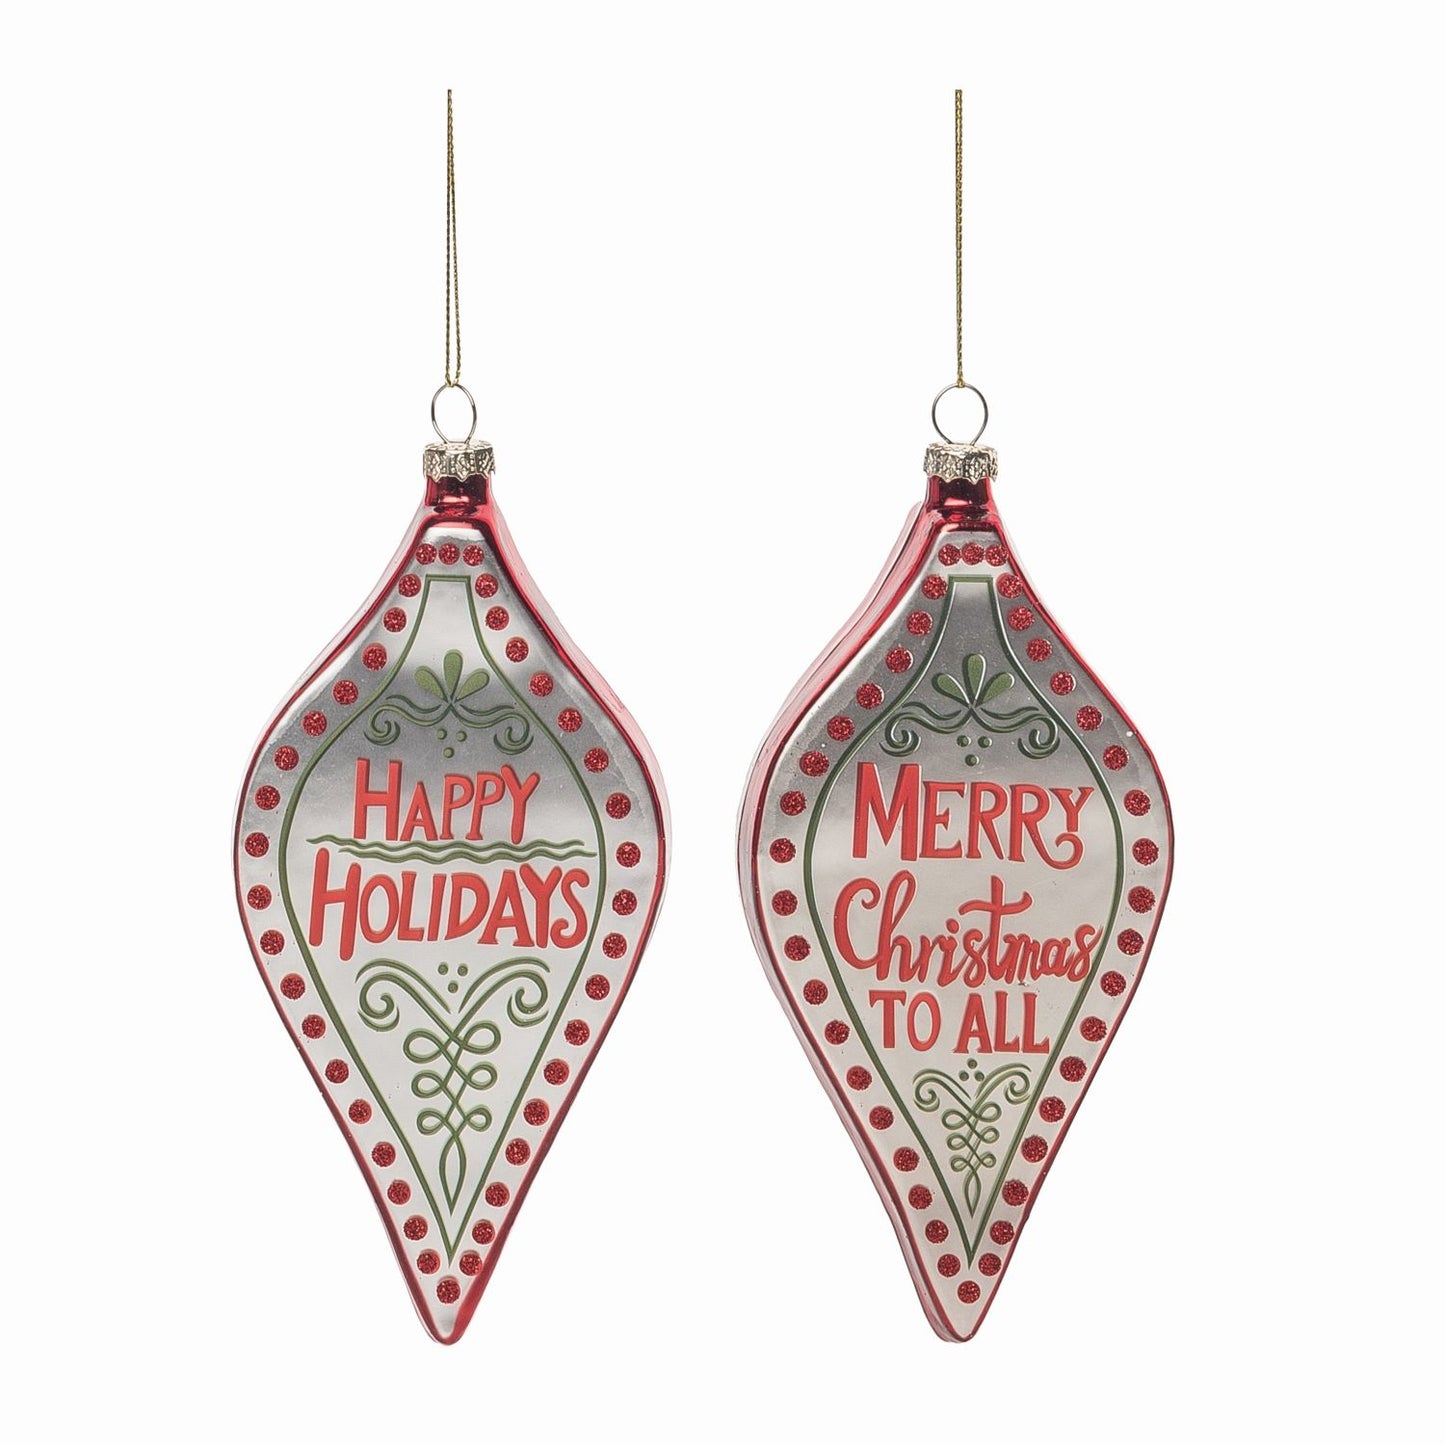 Transpac Glass Painted Holiday Greeting Ornament, Set Of 2, Assortment